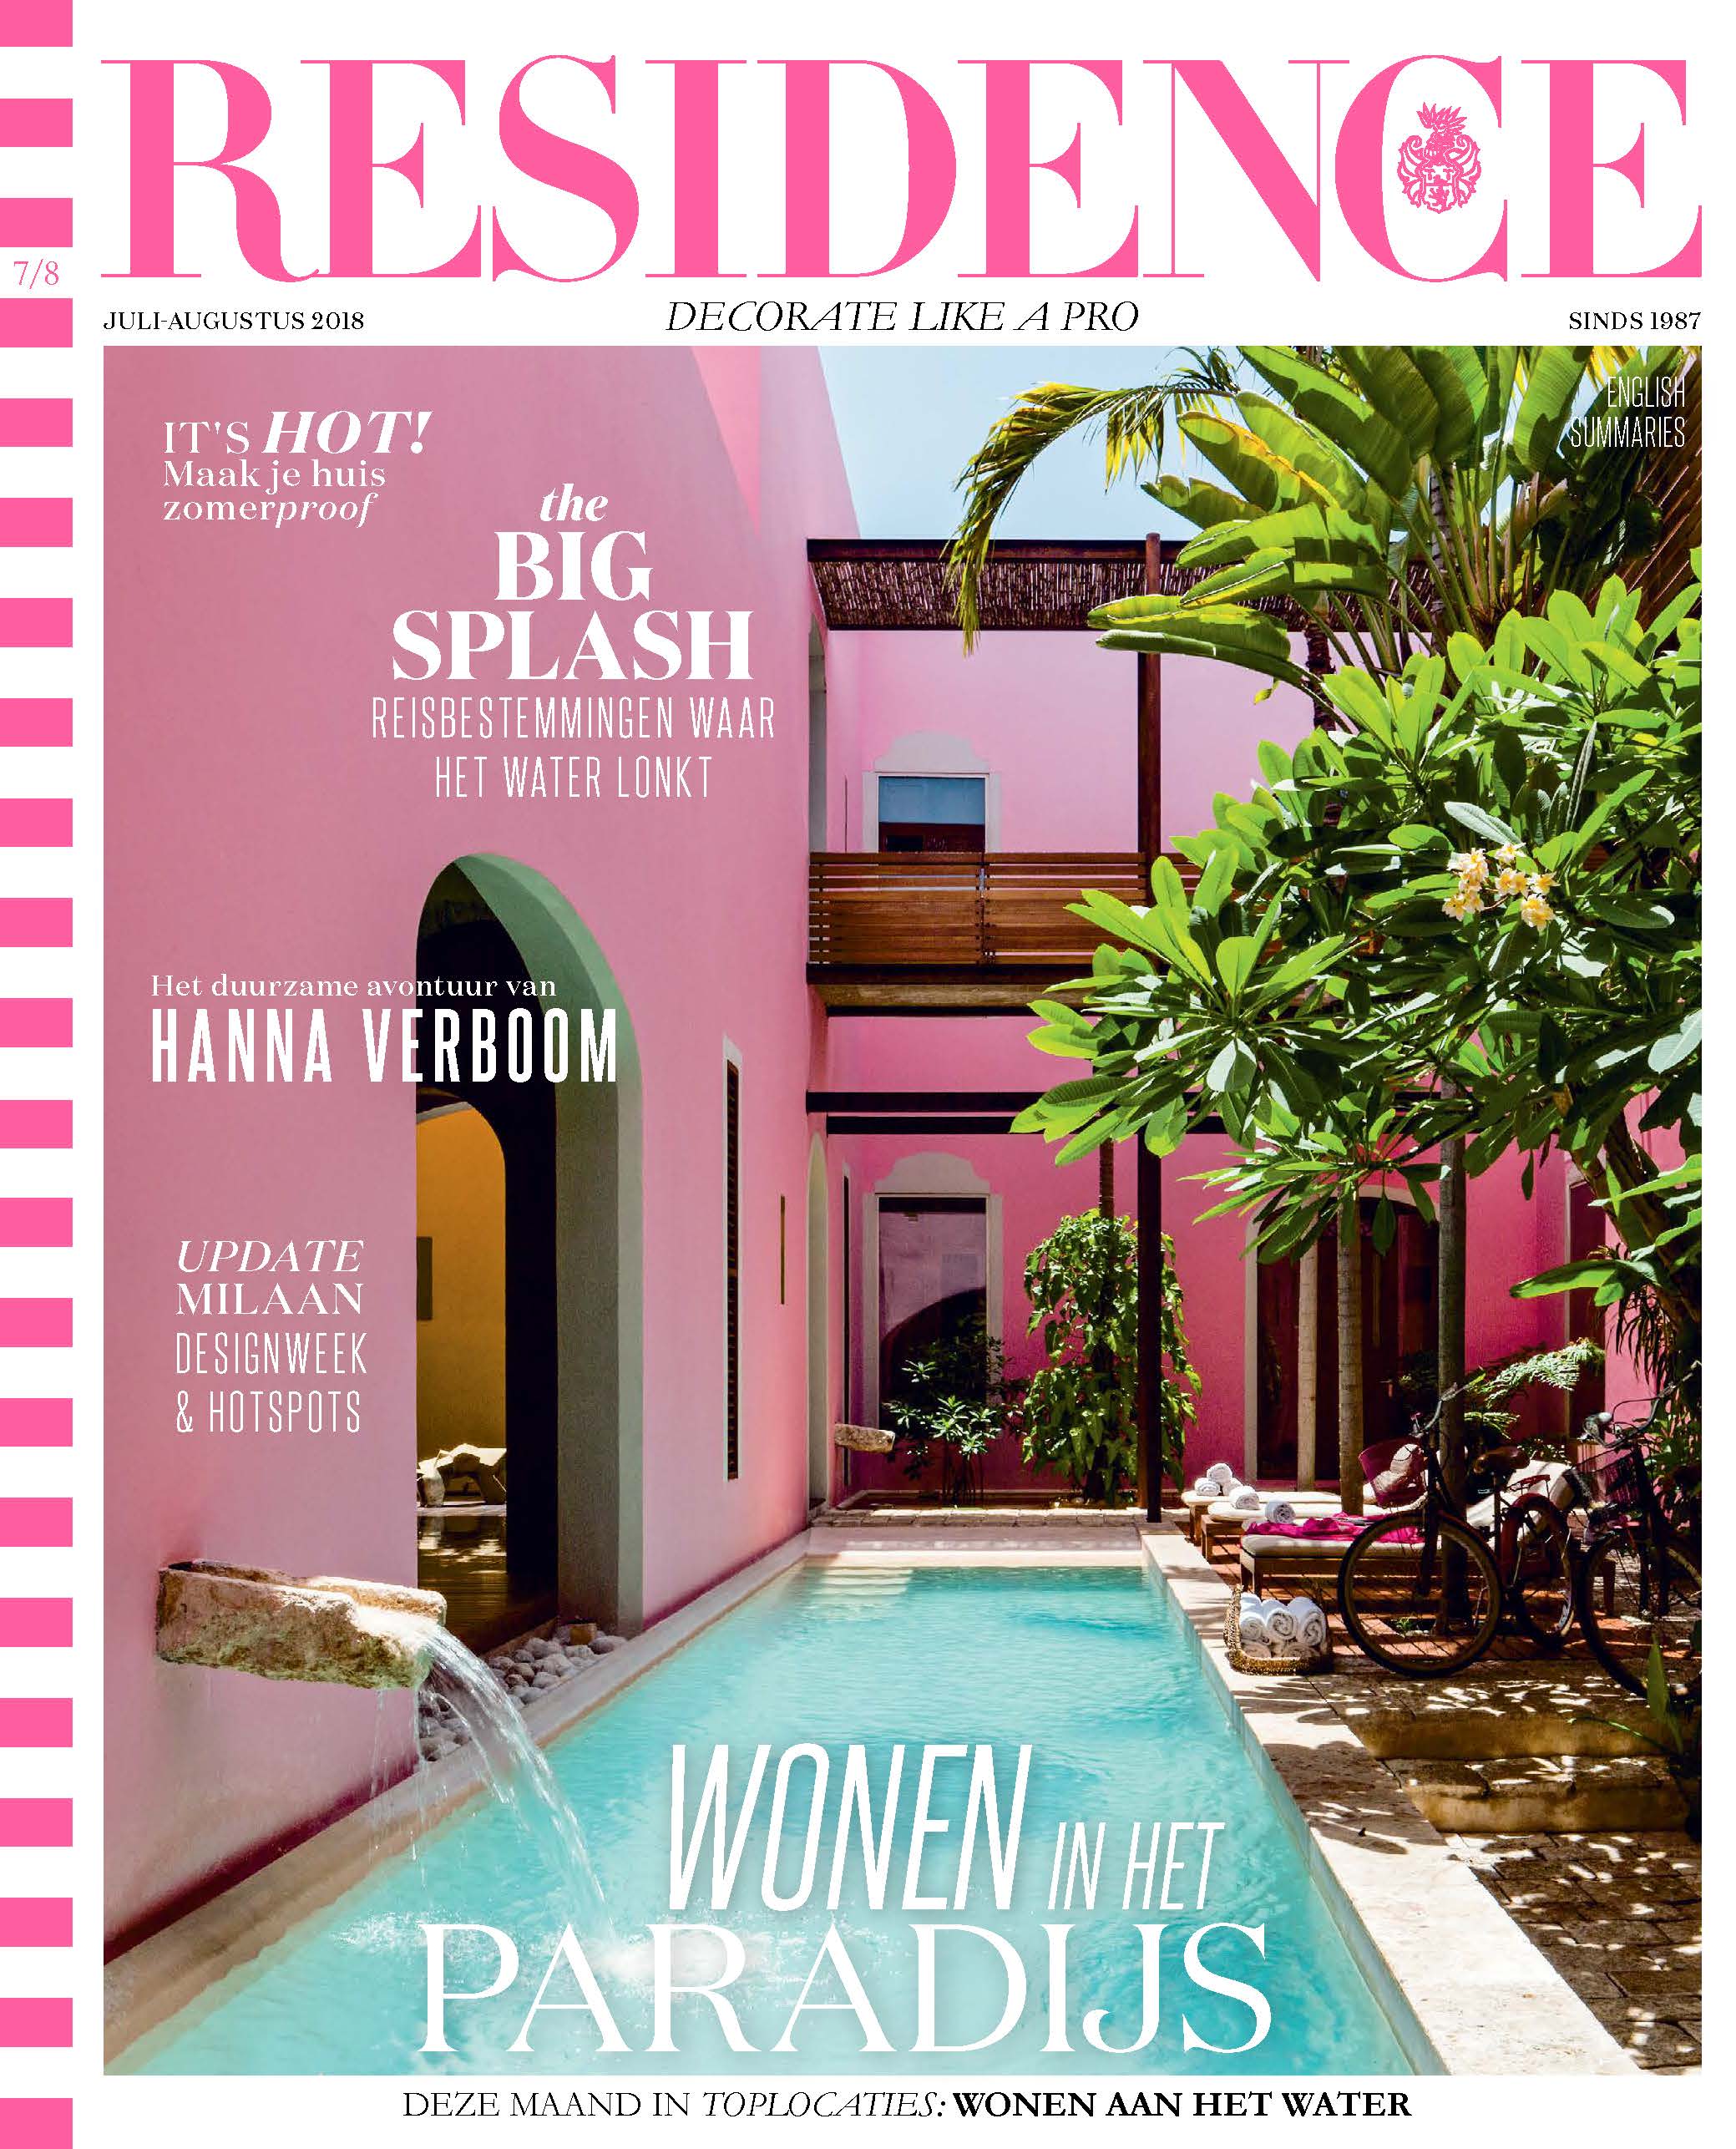 Residence magazine cover for july august 2018 featuring Tanzanian Trellis Grand mosaic pattern